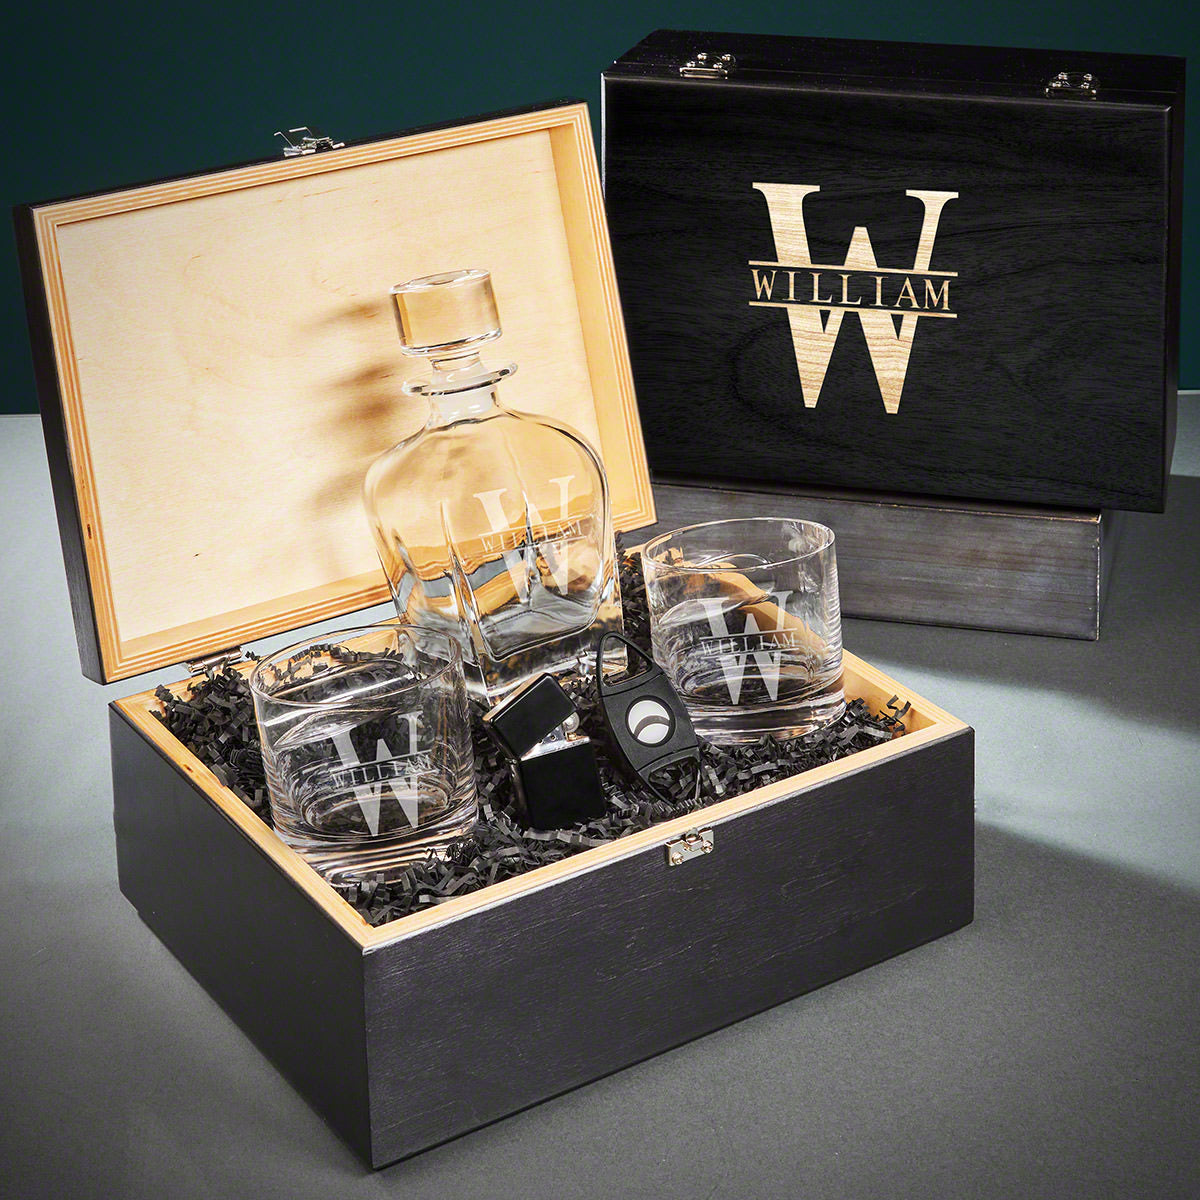 Oxley Custom Cigar Lover Gift Set with Whiskey Decanter and Glasses - 6pc Ebony Black Box